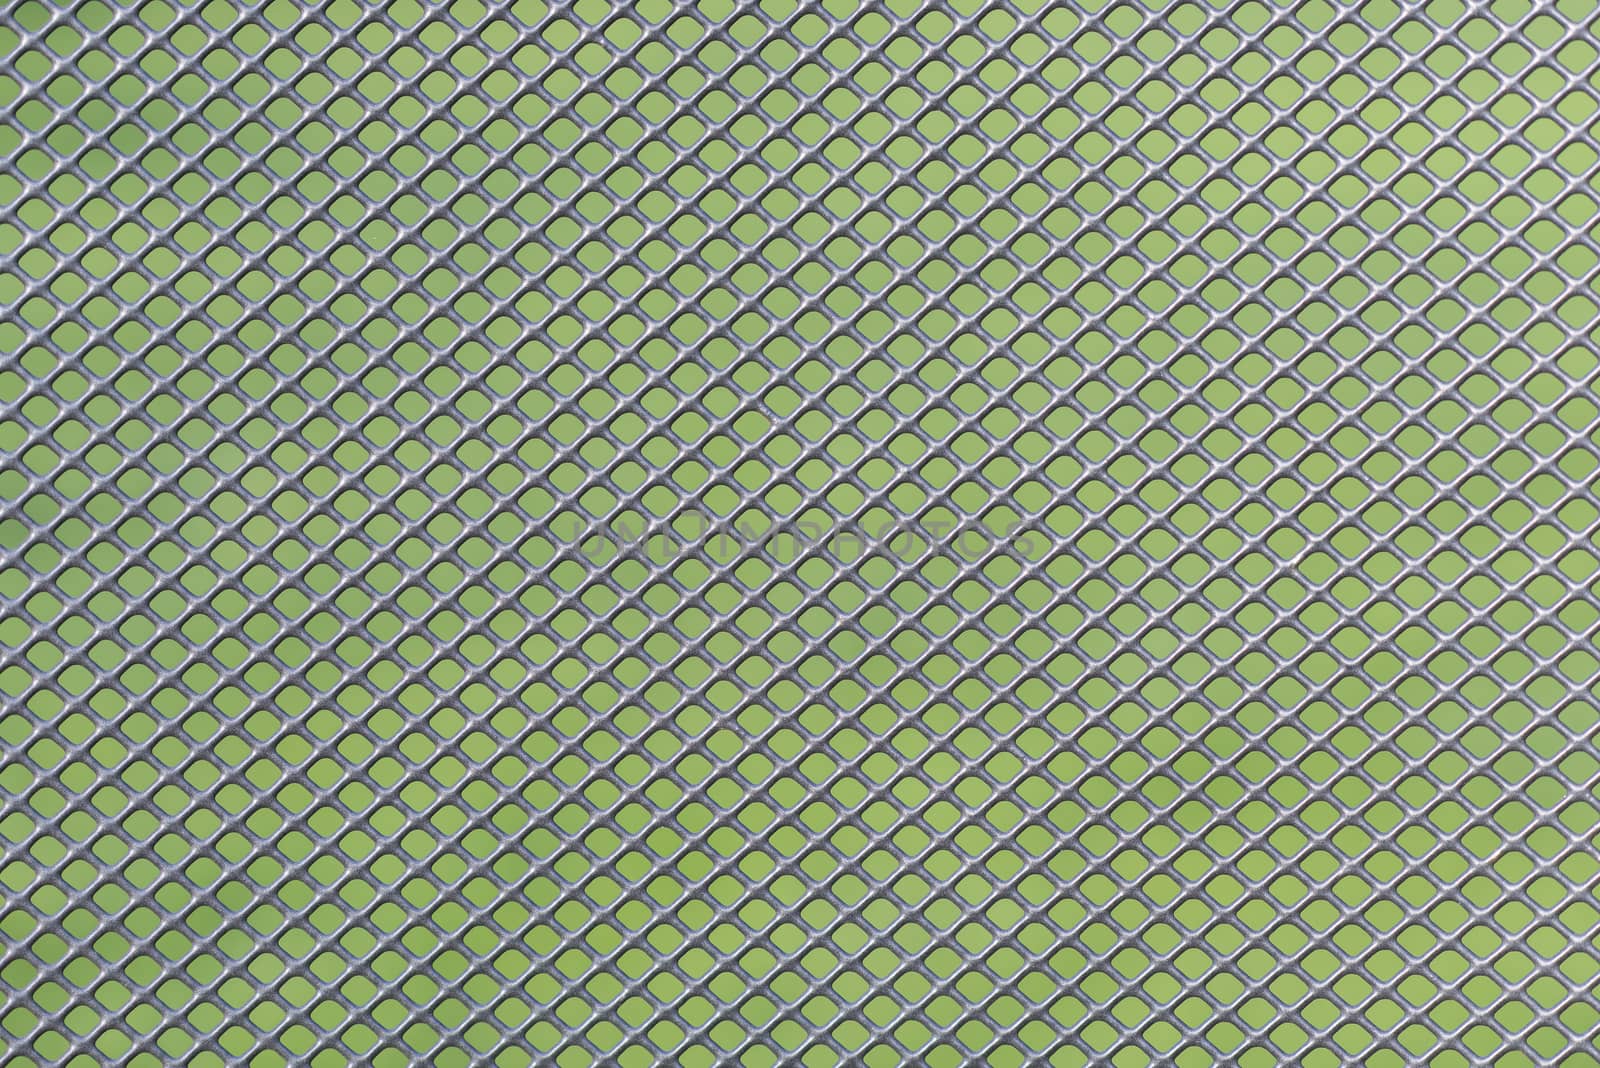 Grey metal wire mesh work against a green background
 by Tofotografie